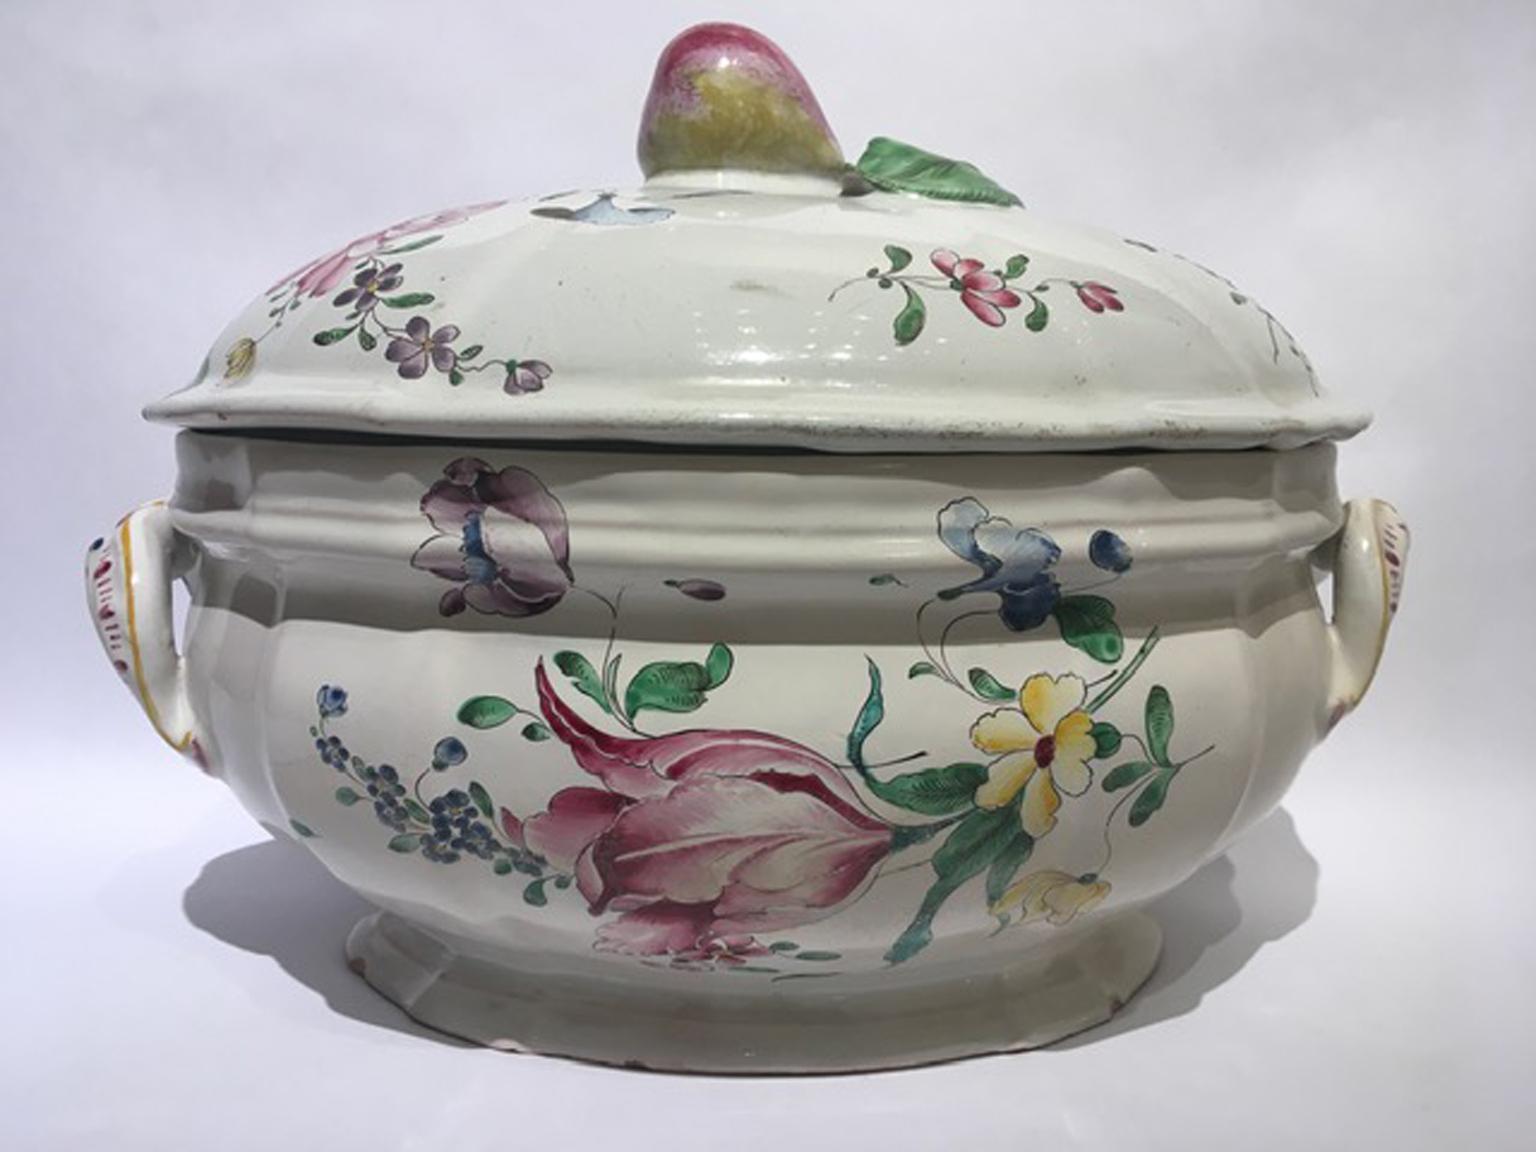 Baroque France Mid-18th Century Porcelain Soup Bowl Flowers and Fruits Drawings en vente